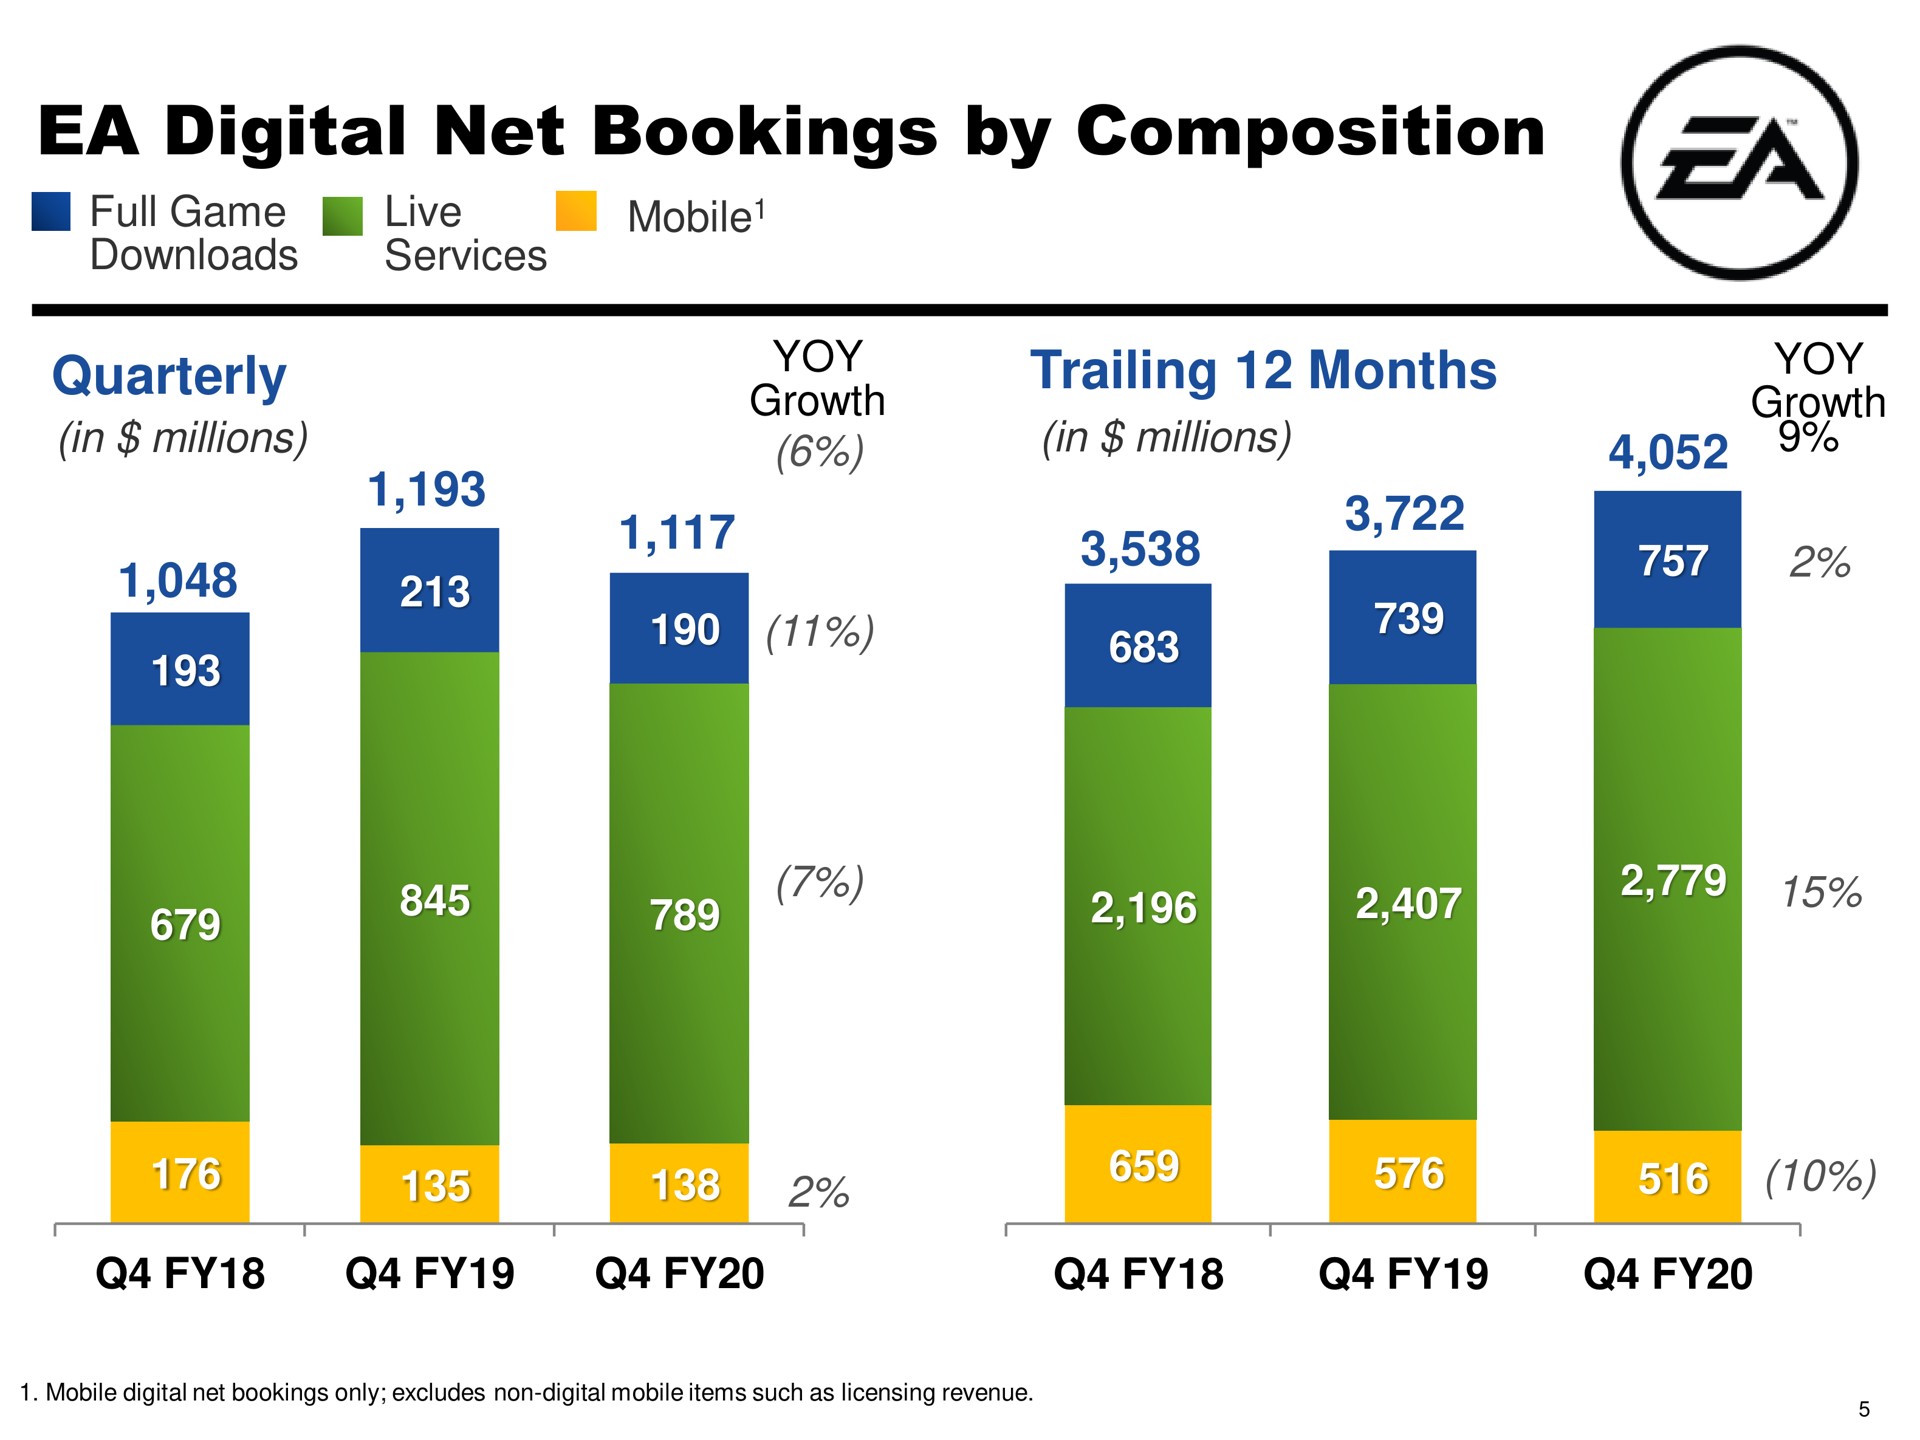 digital net bookings by composition | Electronic Arts